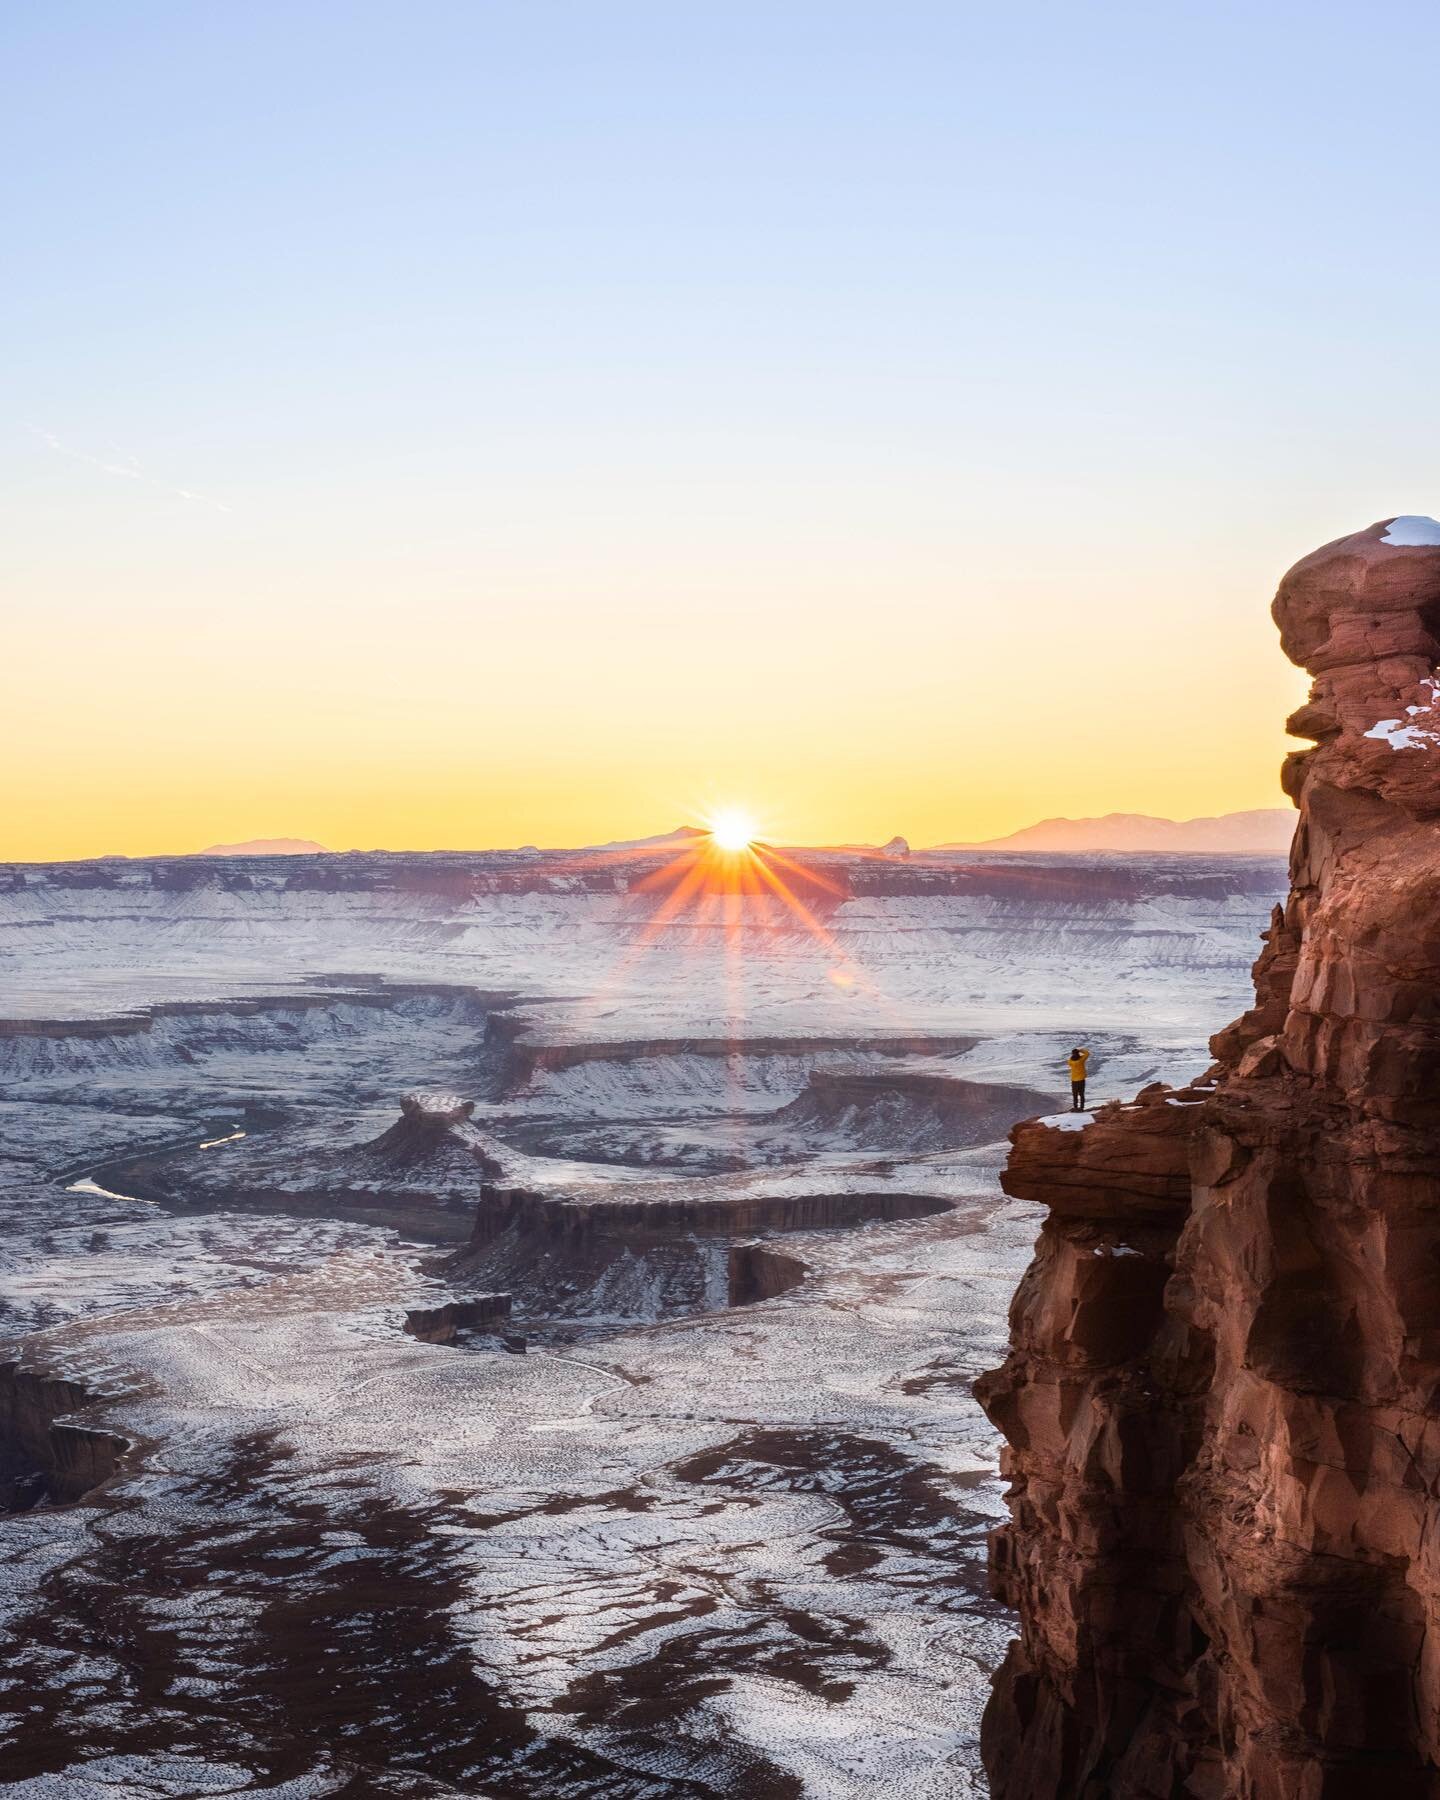 Catching the sunset over Canyonlands.